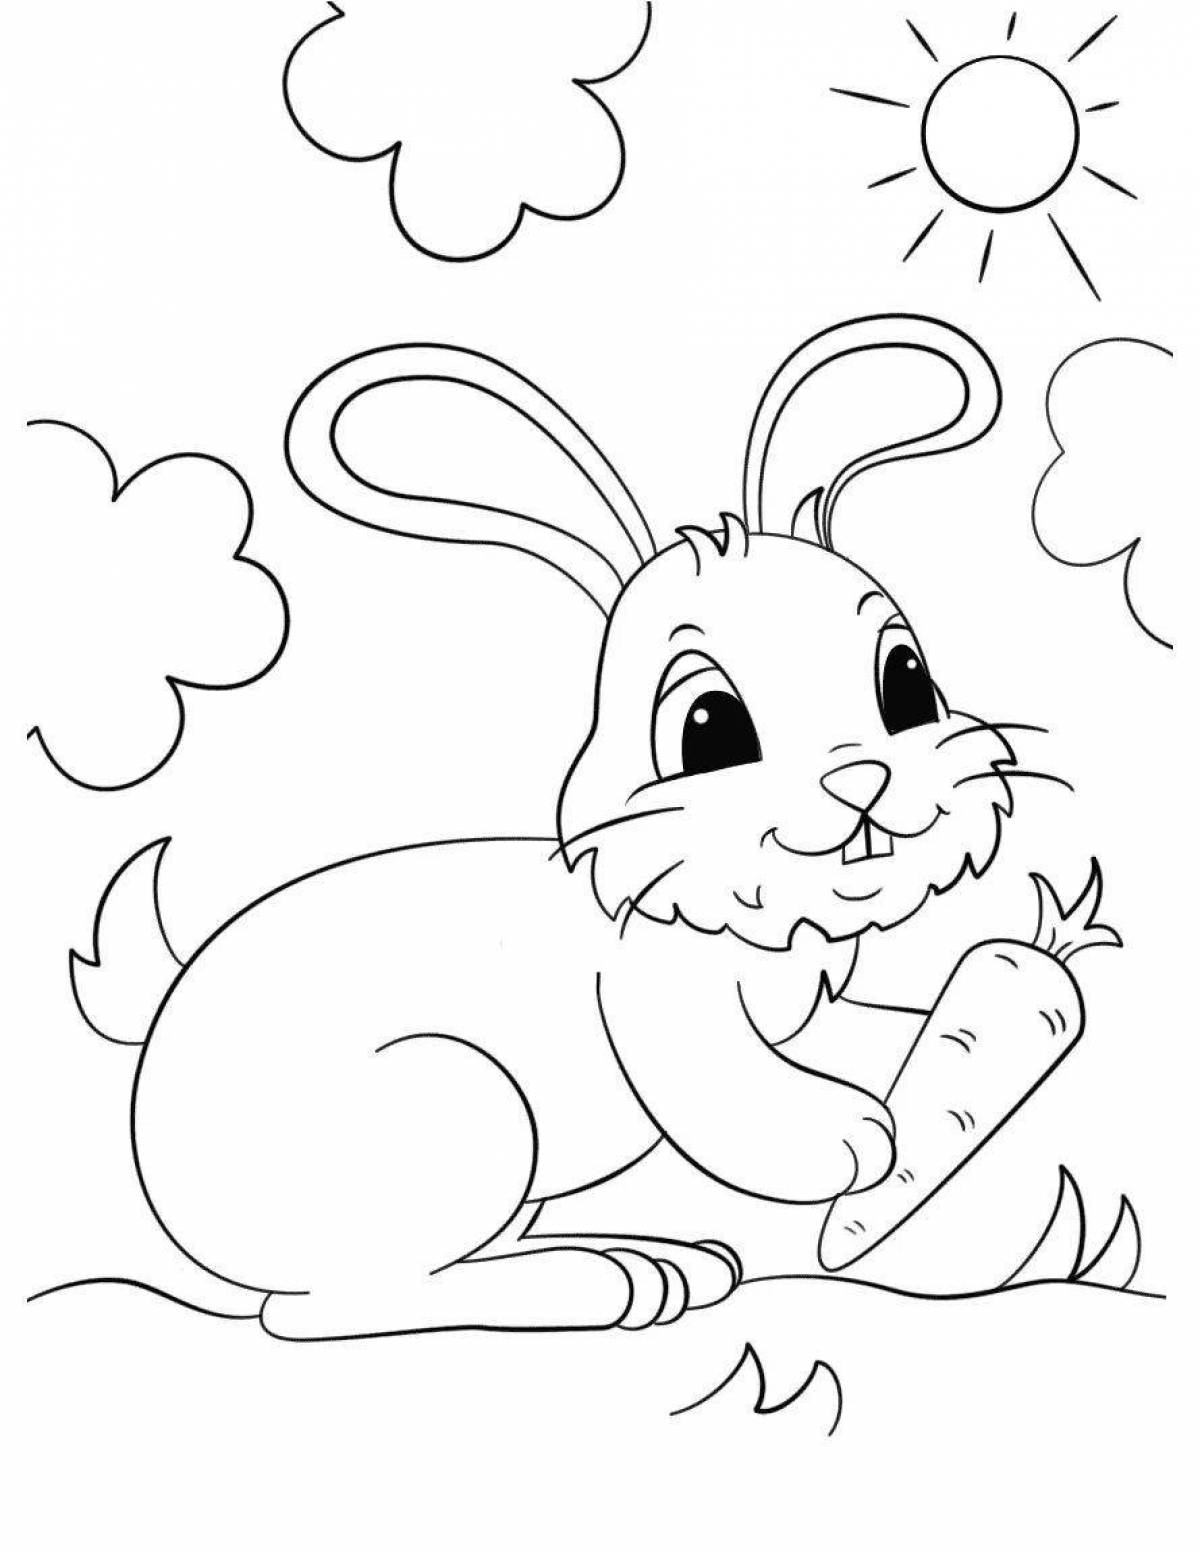 Cute rabbit coloring with carrot for kids